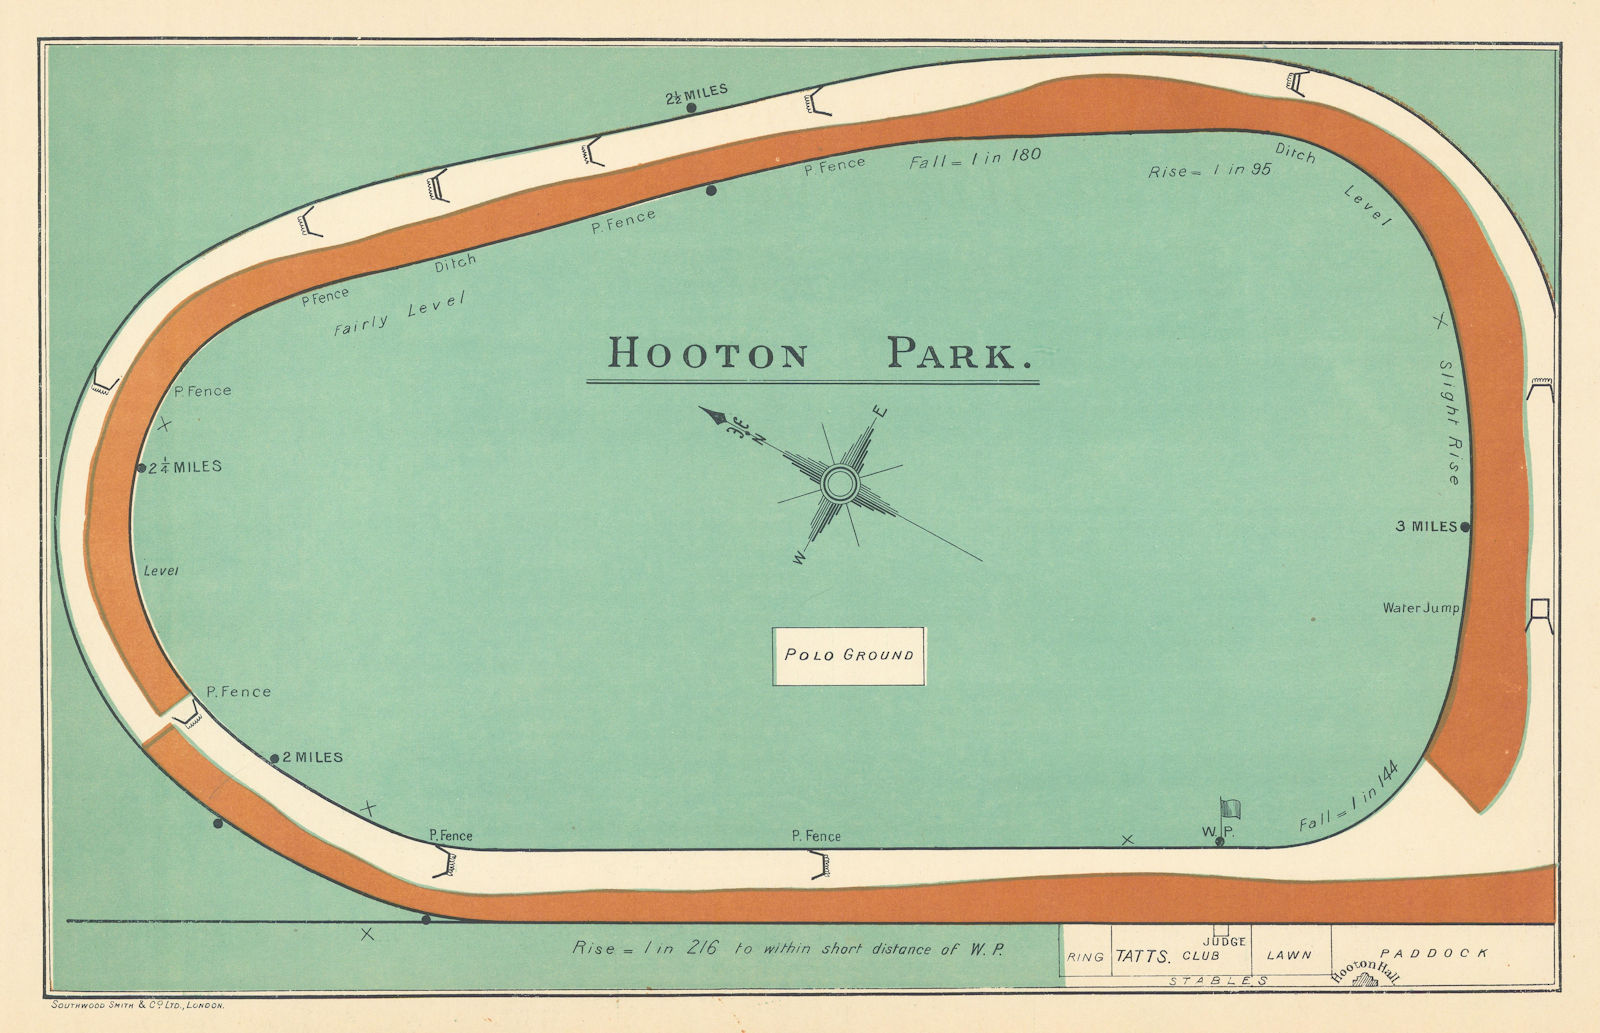 Associate Product Hooton Park racecourse, Cheshire. Closed 1915. BAYLES 1903 old antique map